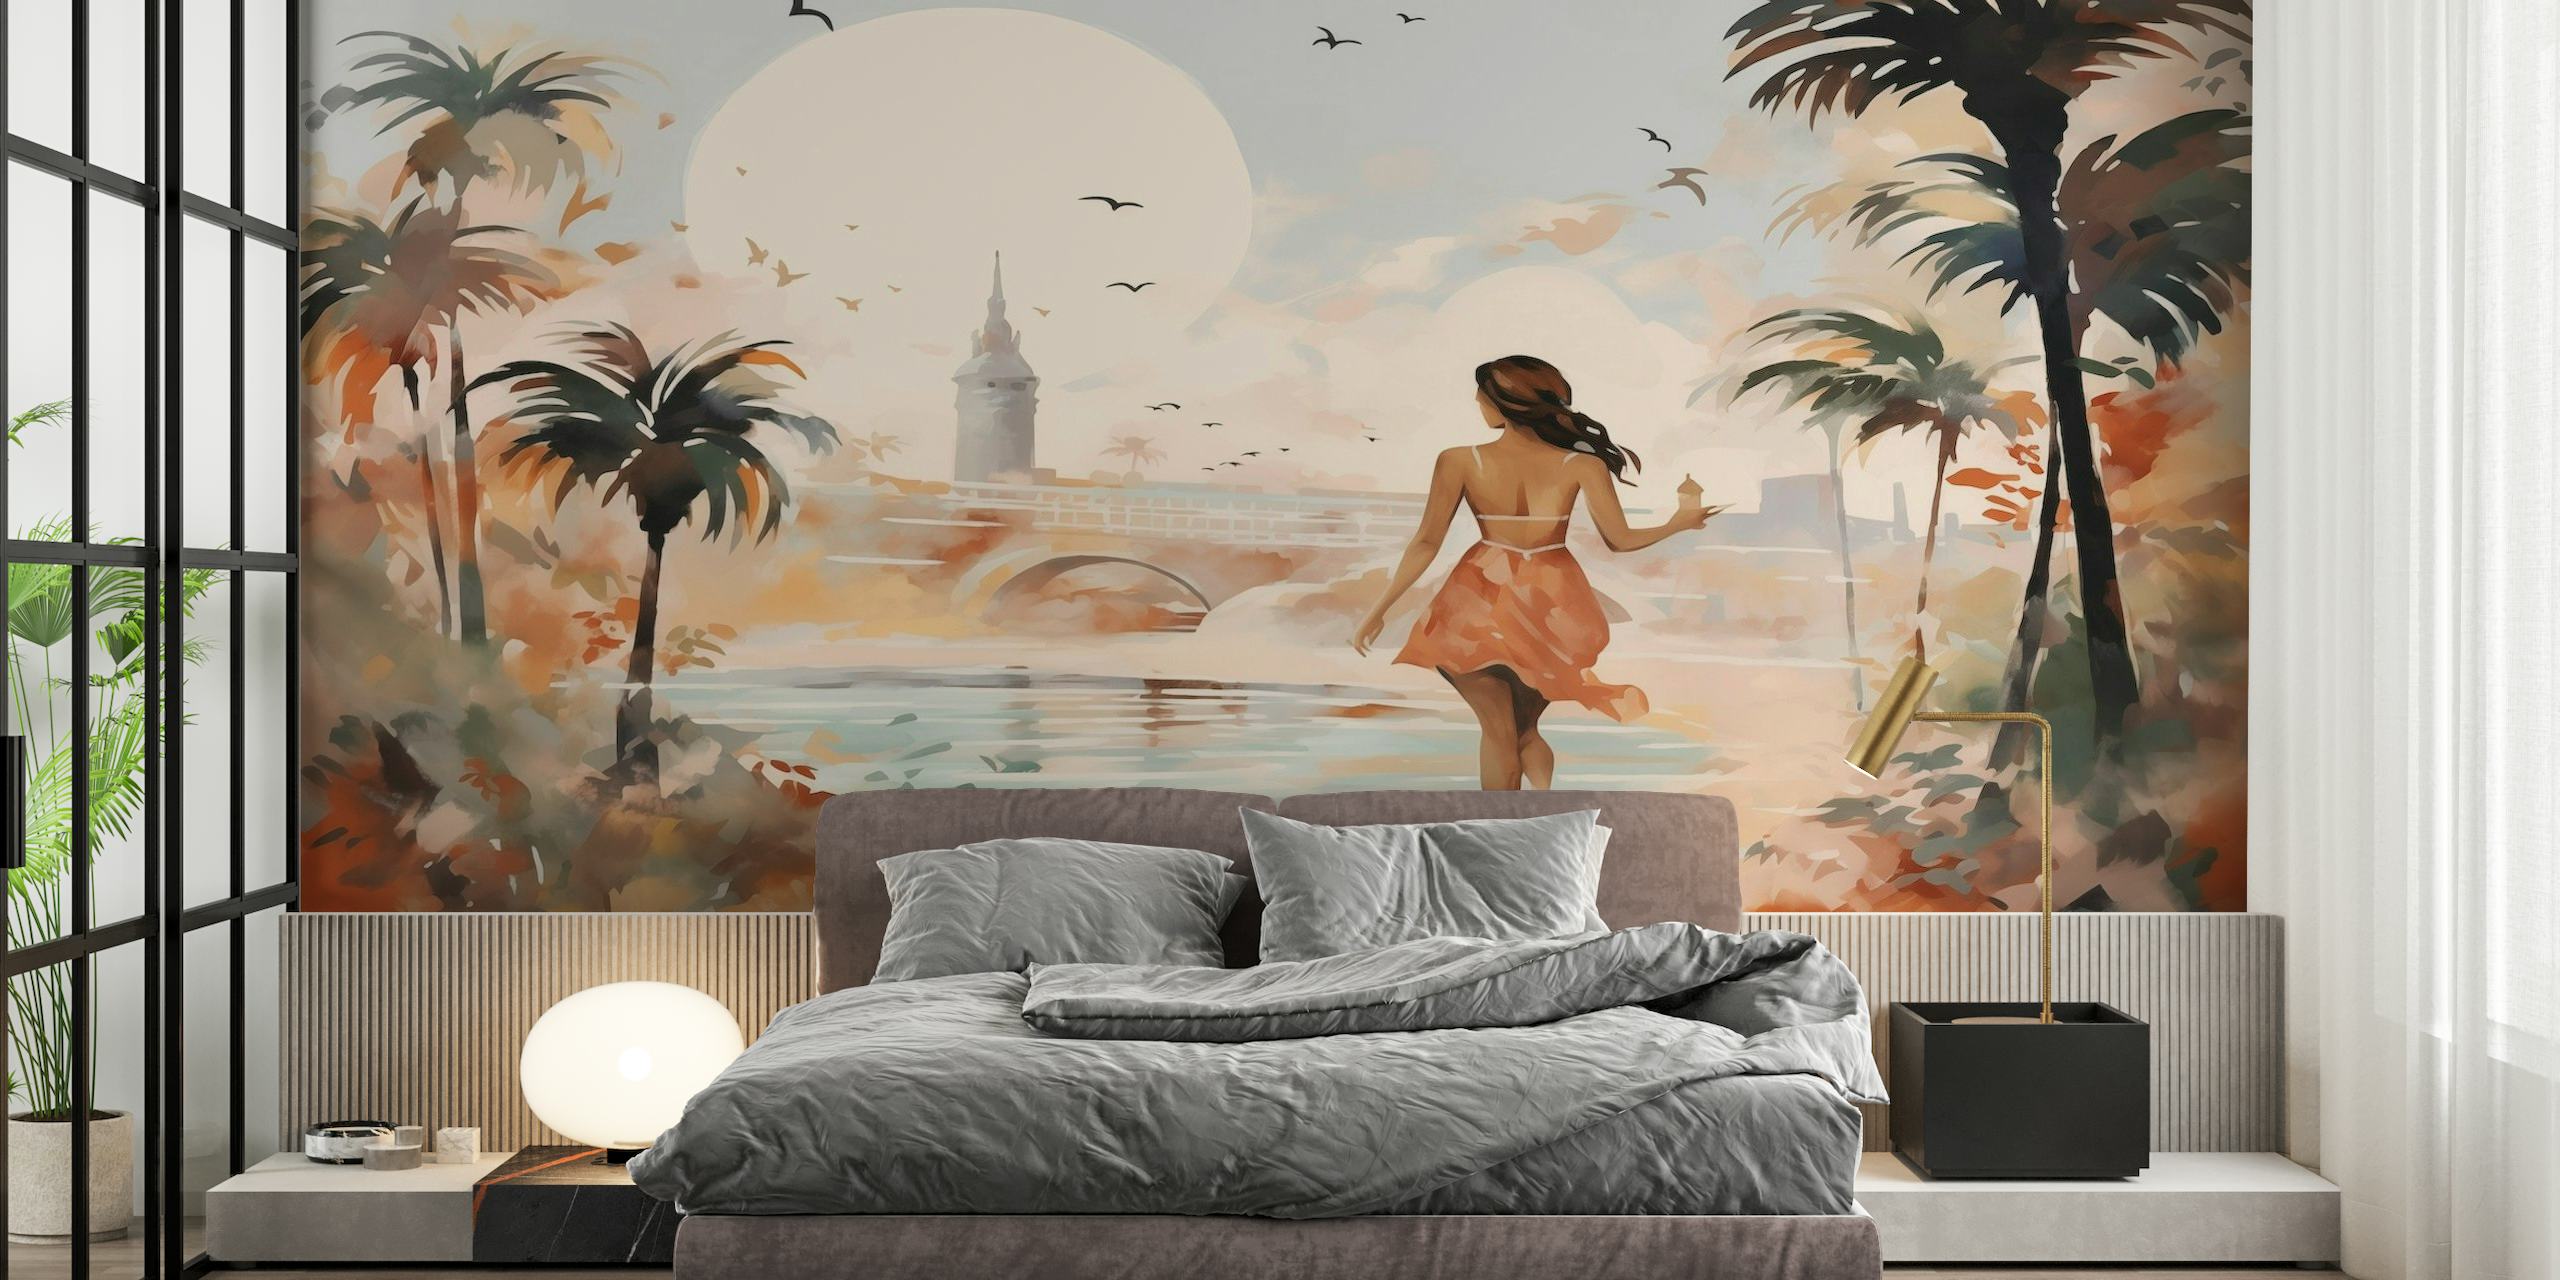 Impressionistic summer cityscape wall mural with silhouette of a person walking under palm trees.